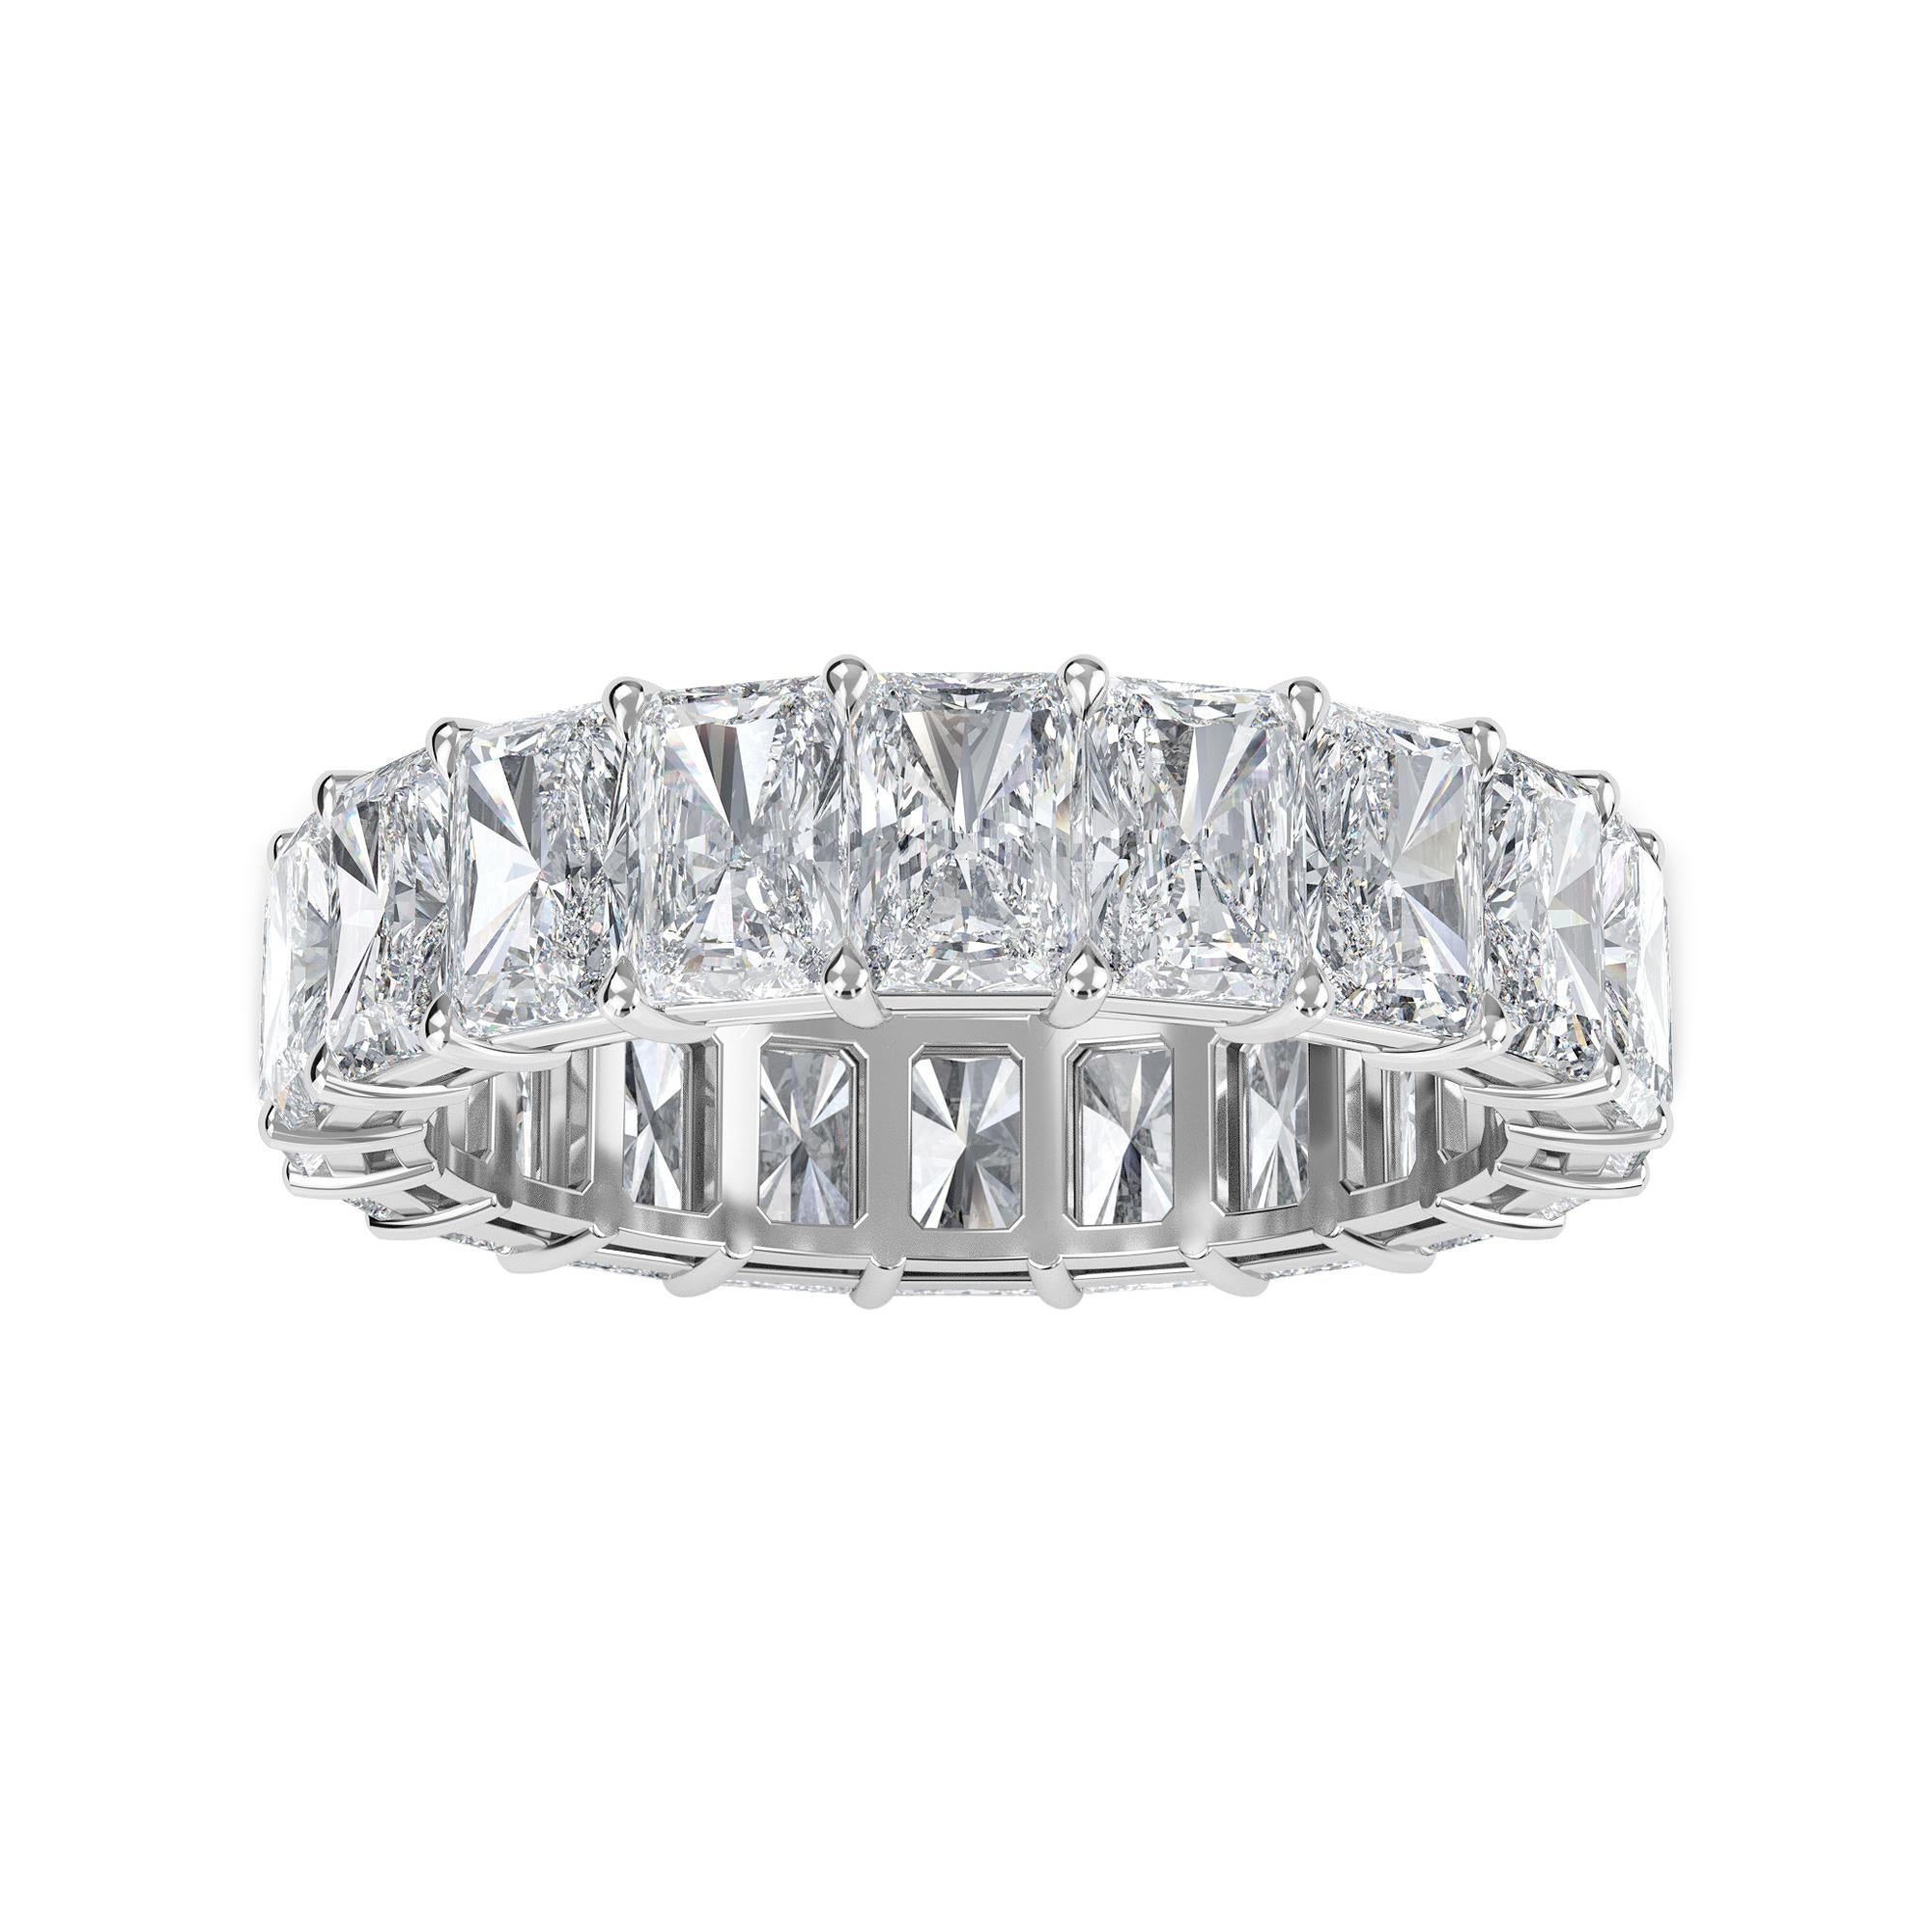 Women's or Men's Radiant Diamond Eternity Band, 6.20 Total Carat Weight